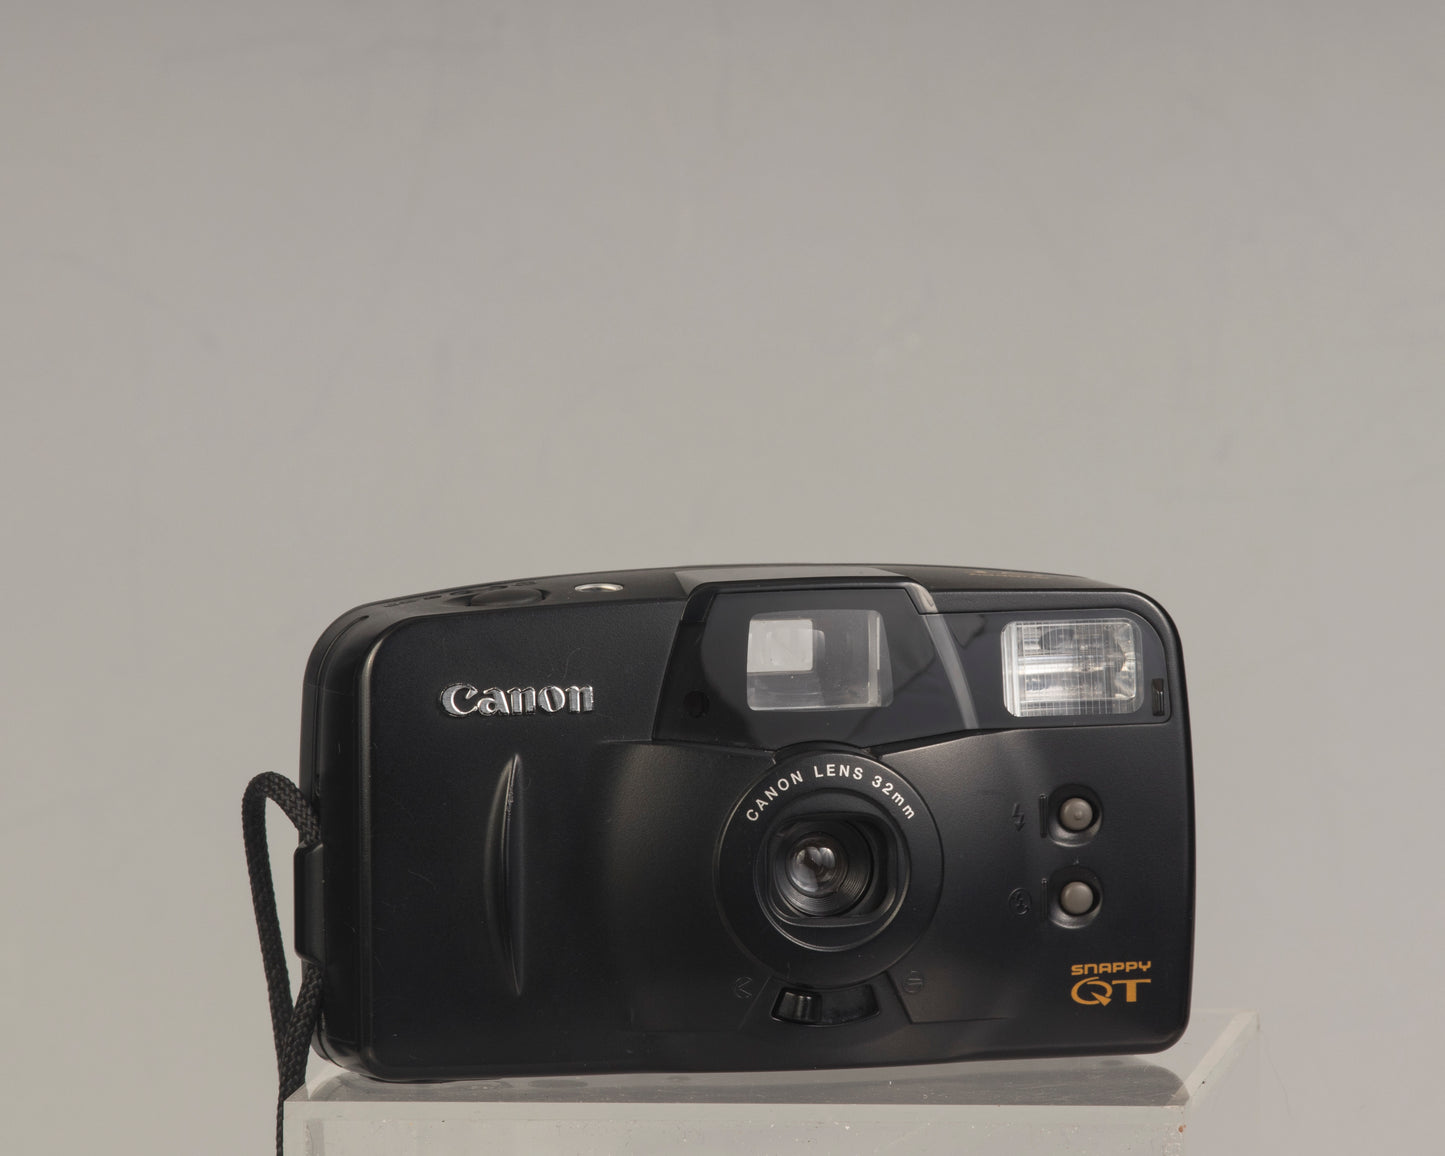 The Canon Snappy QT is a 35mm film point-and-shoot camera featuring a 32mm lens and an unusually large and bright viewfinder.